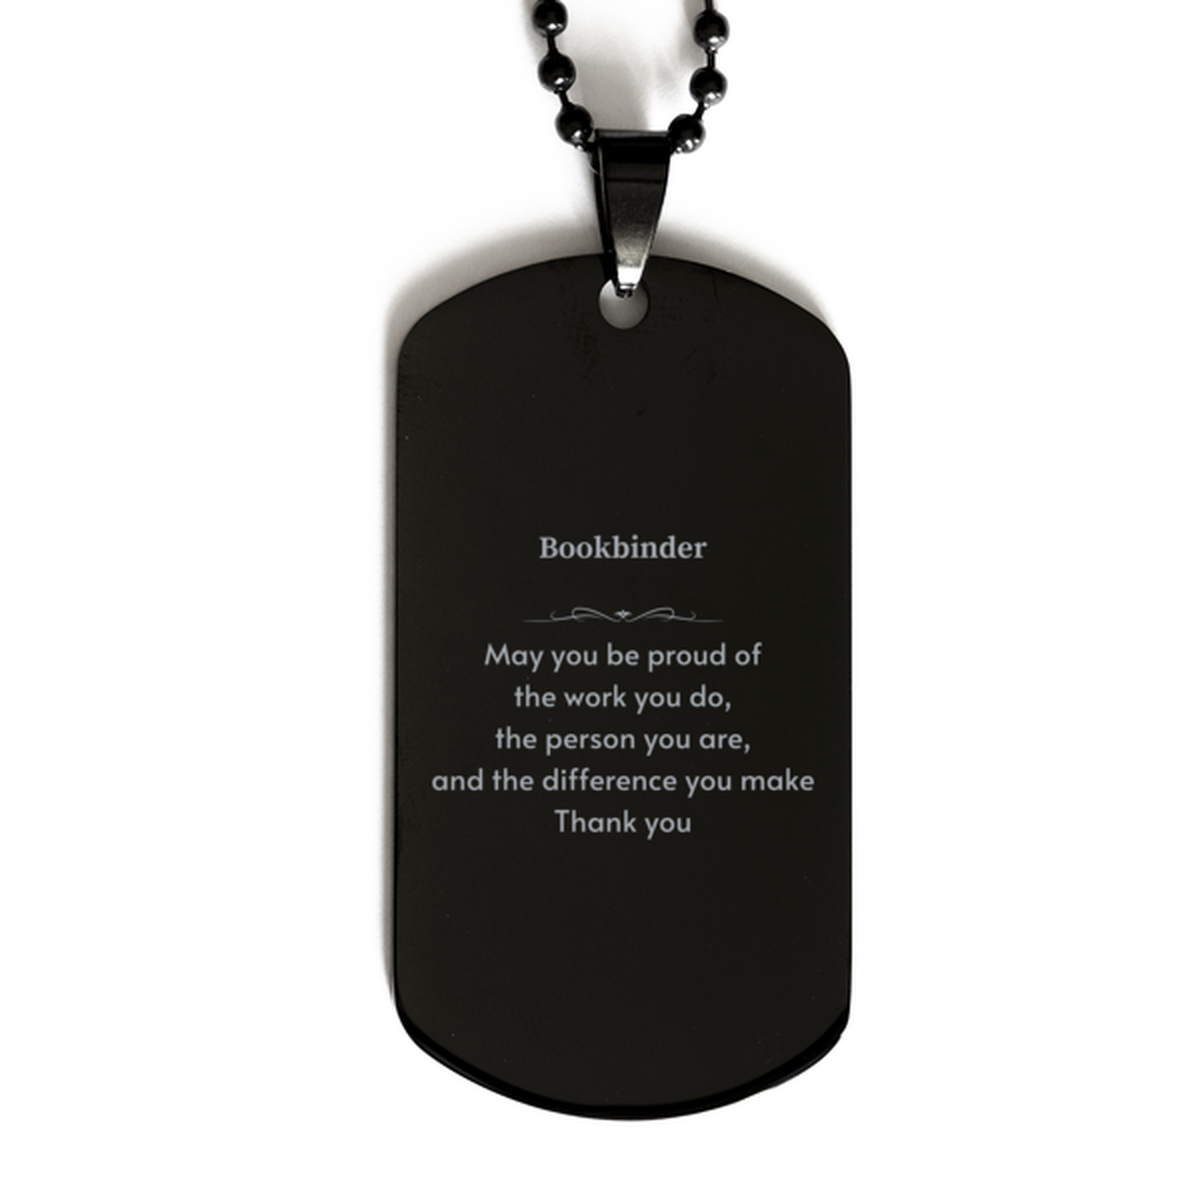 Heartwarming Black Dog Tag Retirement Coworkers Gifts for Bookbinder, Bookbinder May You be proud of the work you do, the person you are Gifts for Boss Men Women Friends